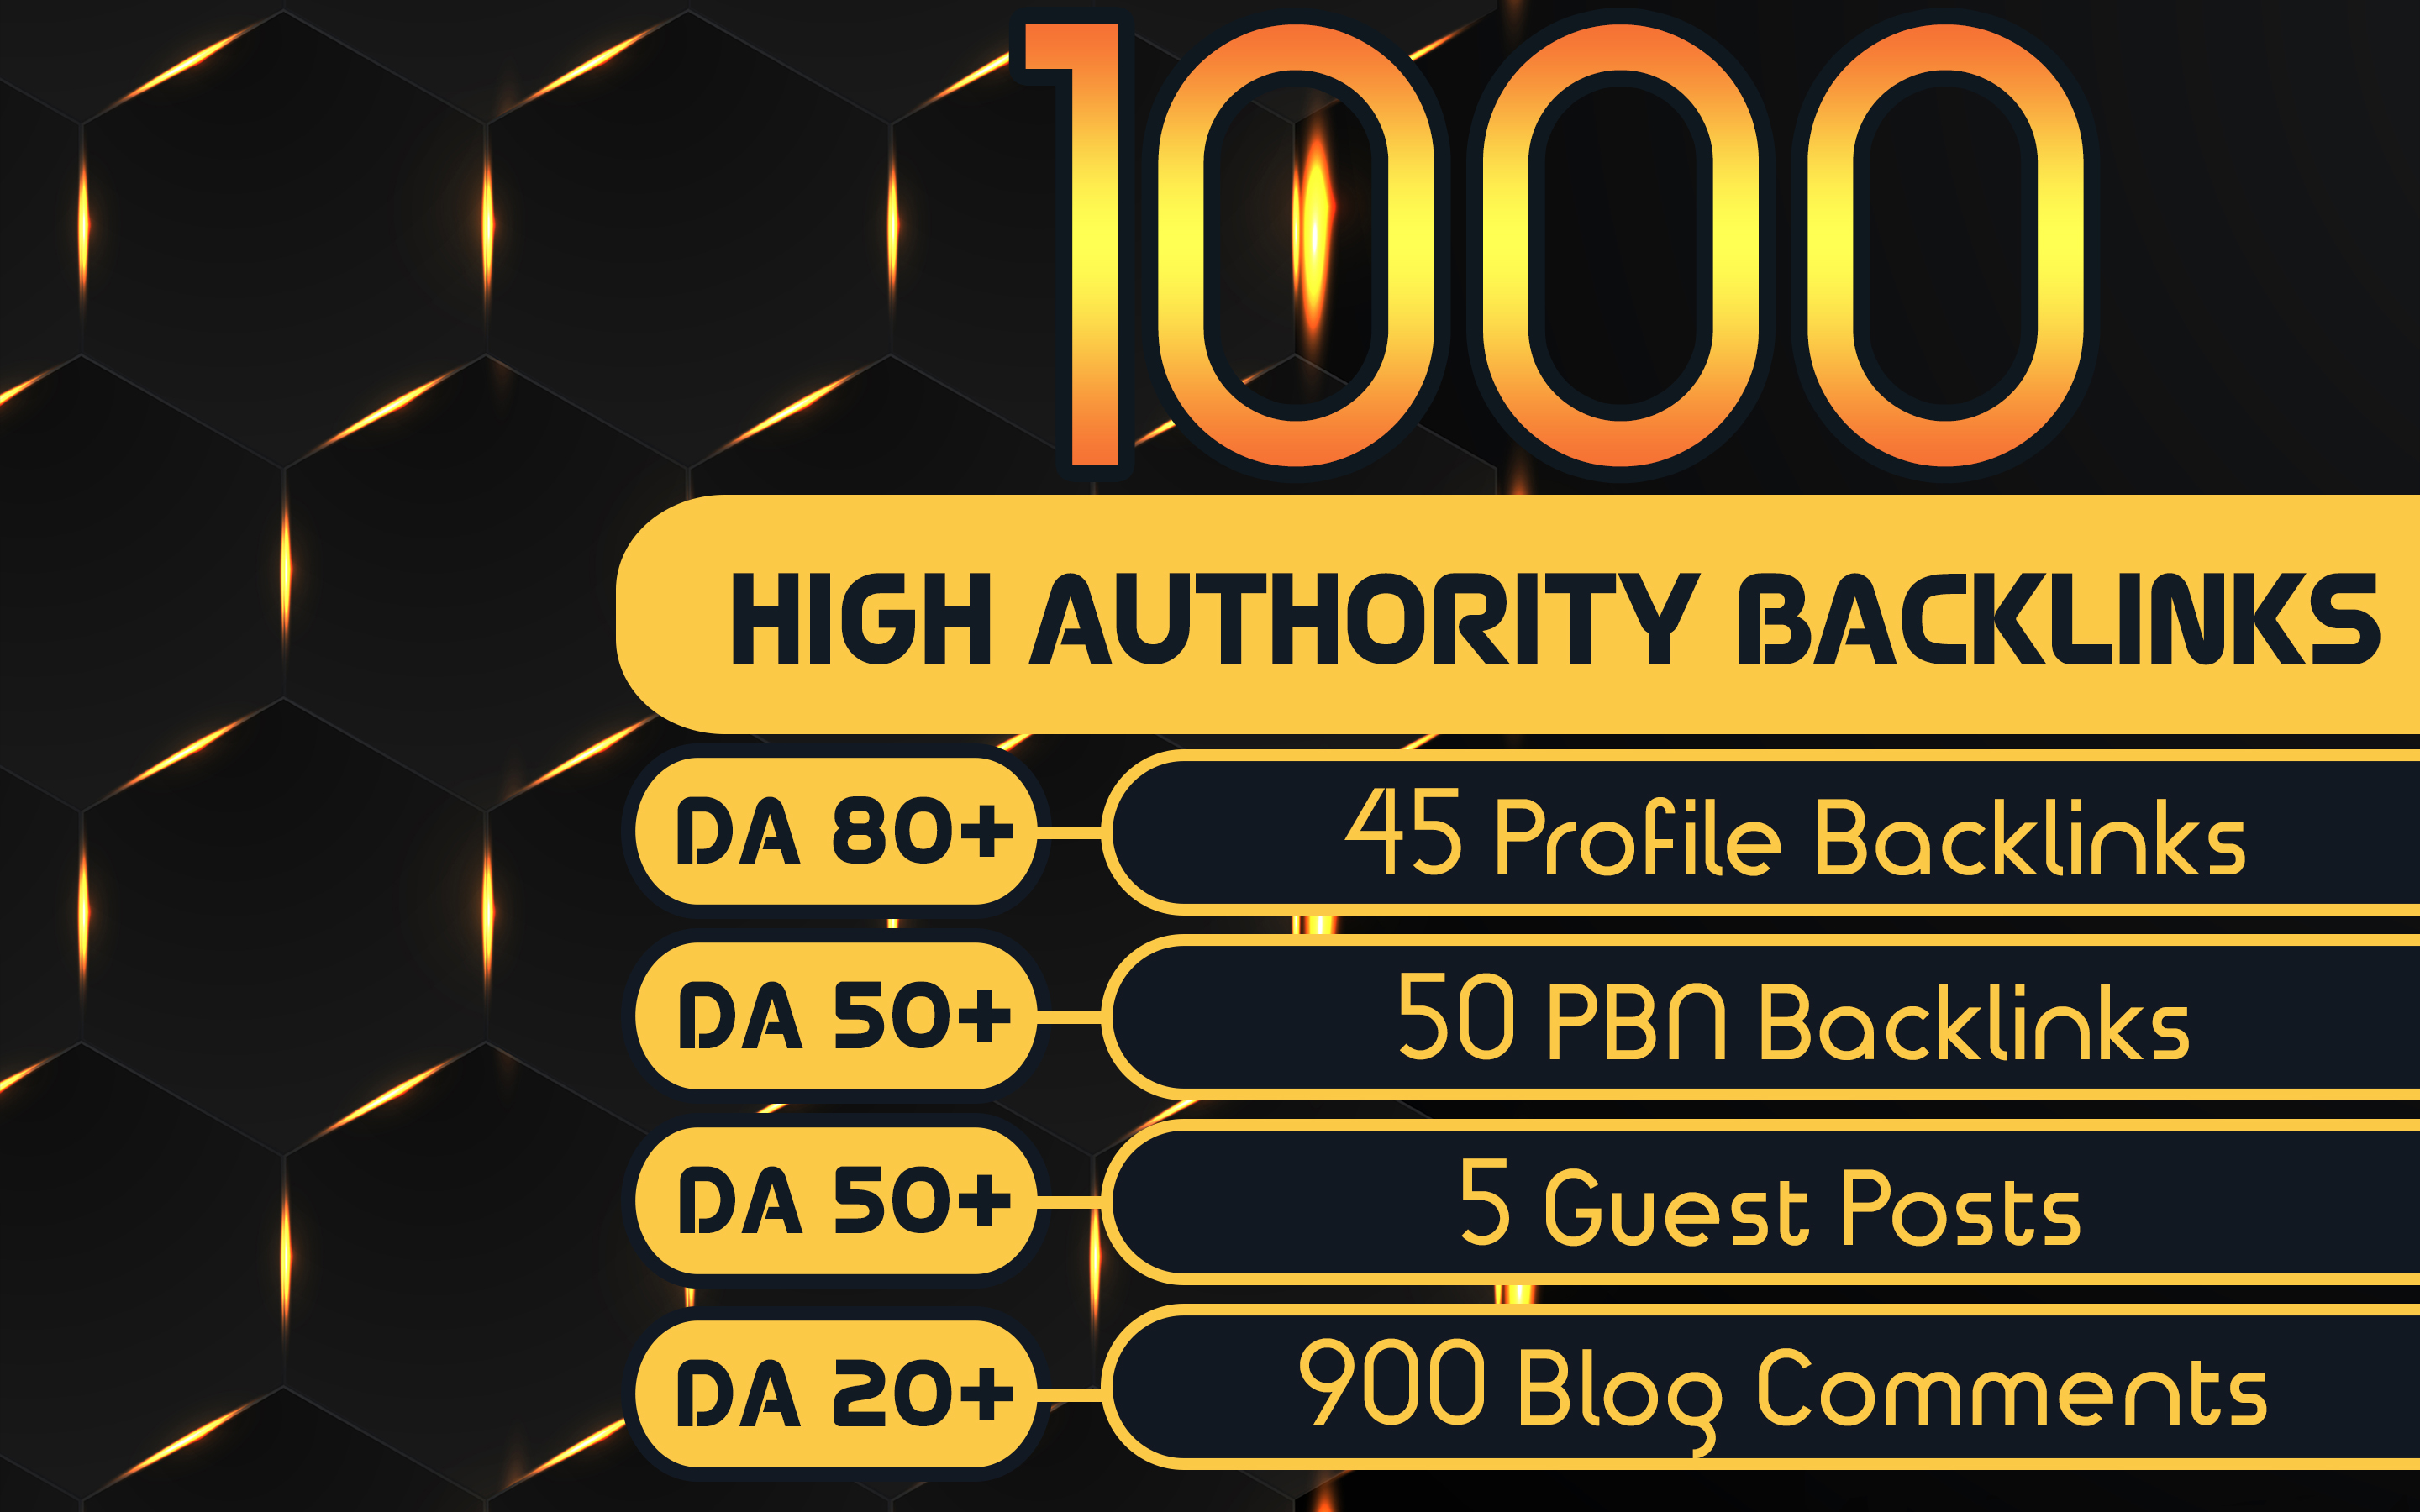 Get 1000 High Authority Backlinks, Blog Comments, Profile Backlinks, PBNs, Guest Posts